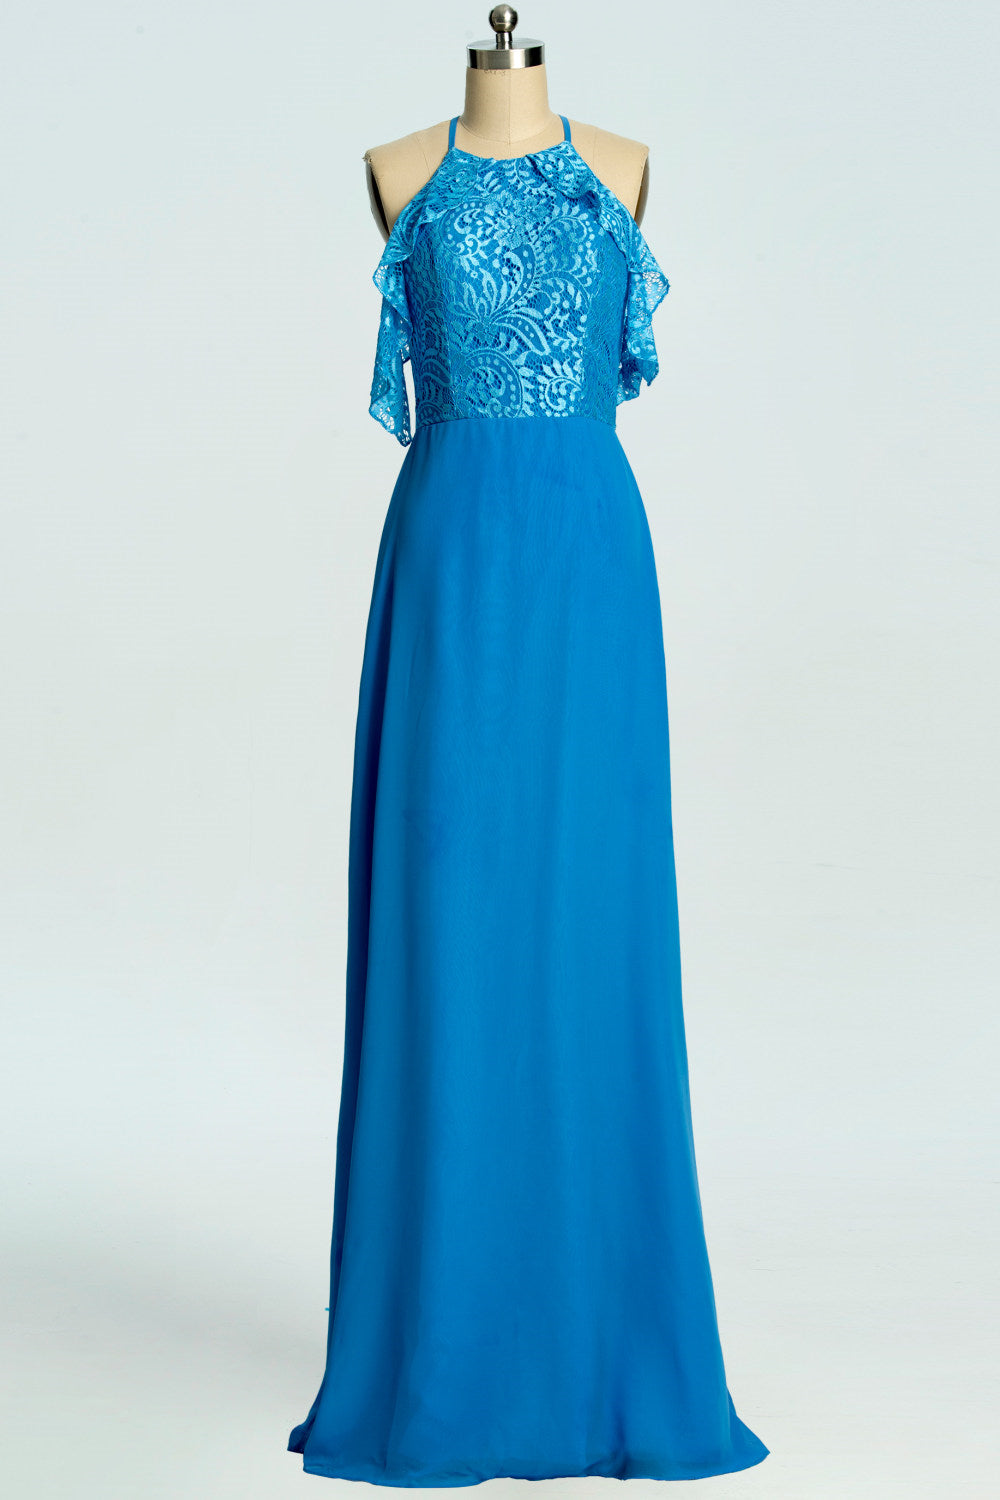 Blue A-line Lace and Chiffon Full Length Bridesmaid Dress